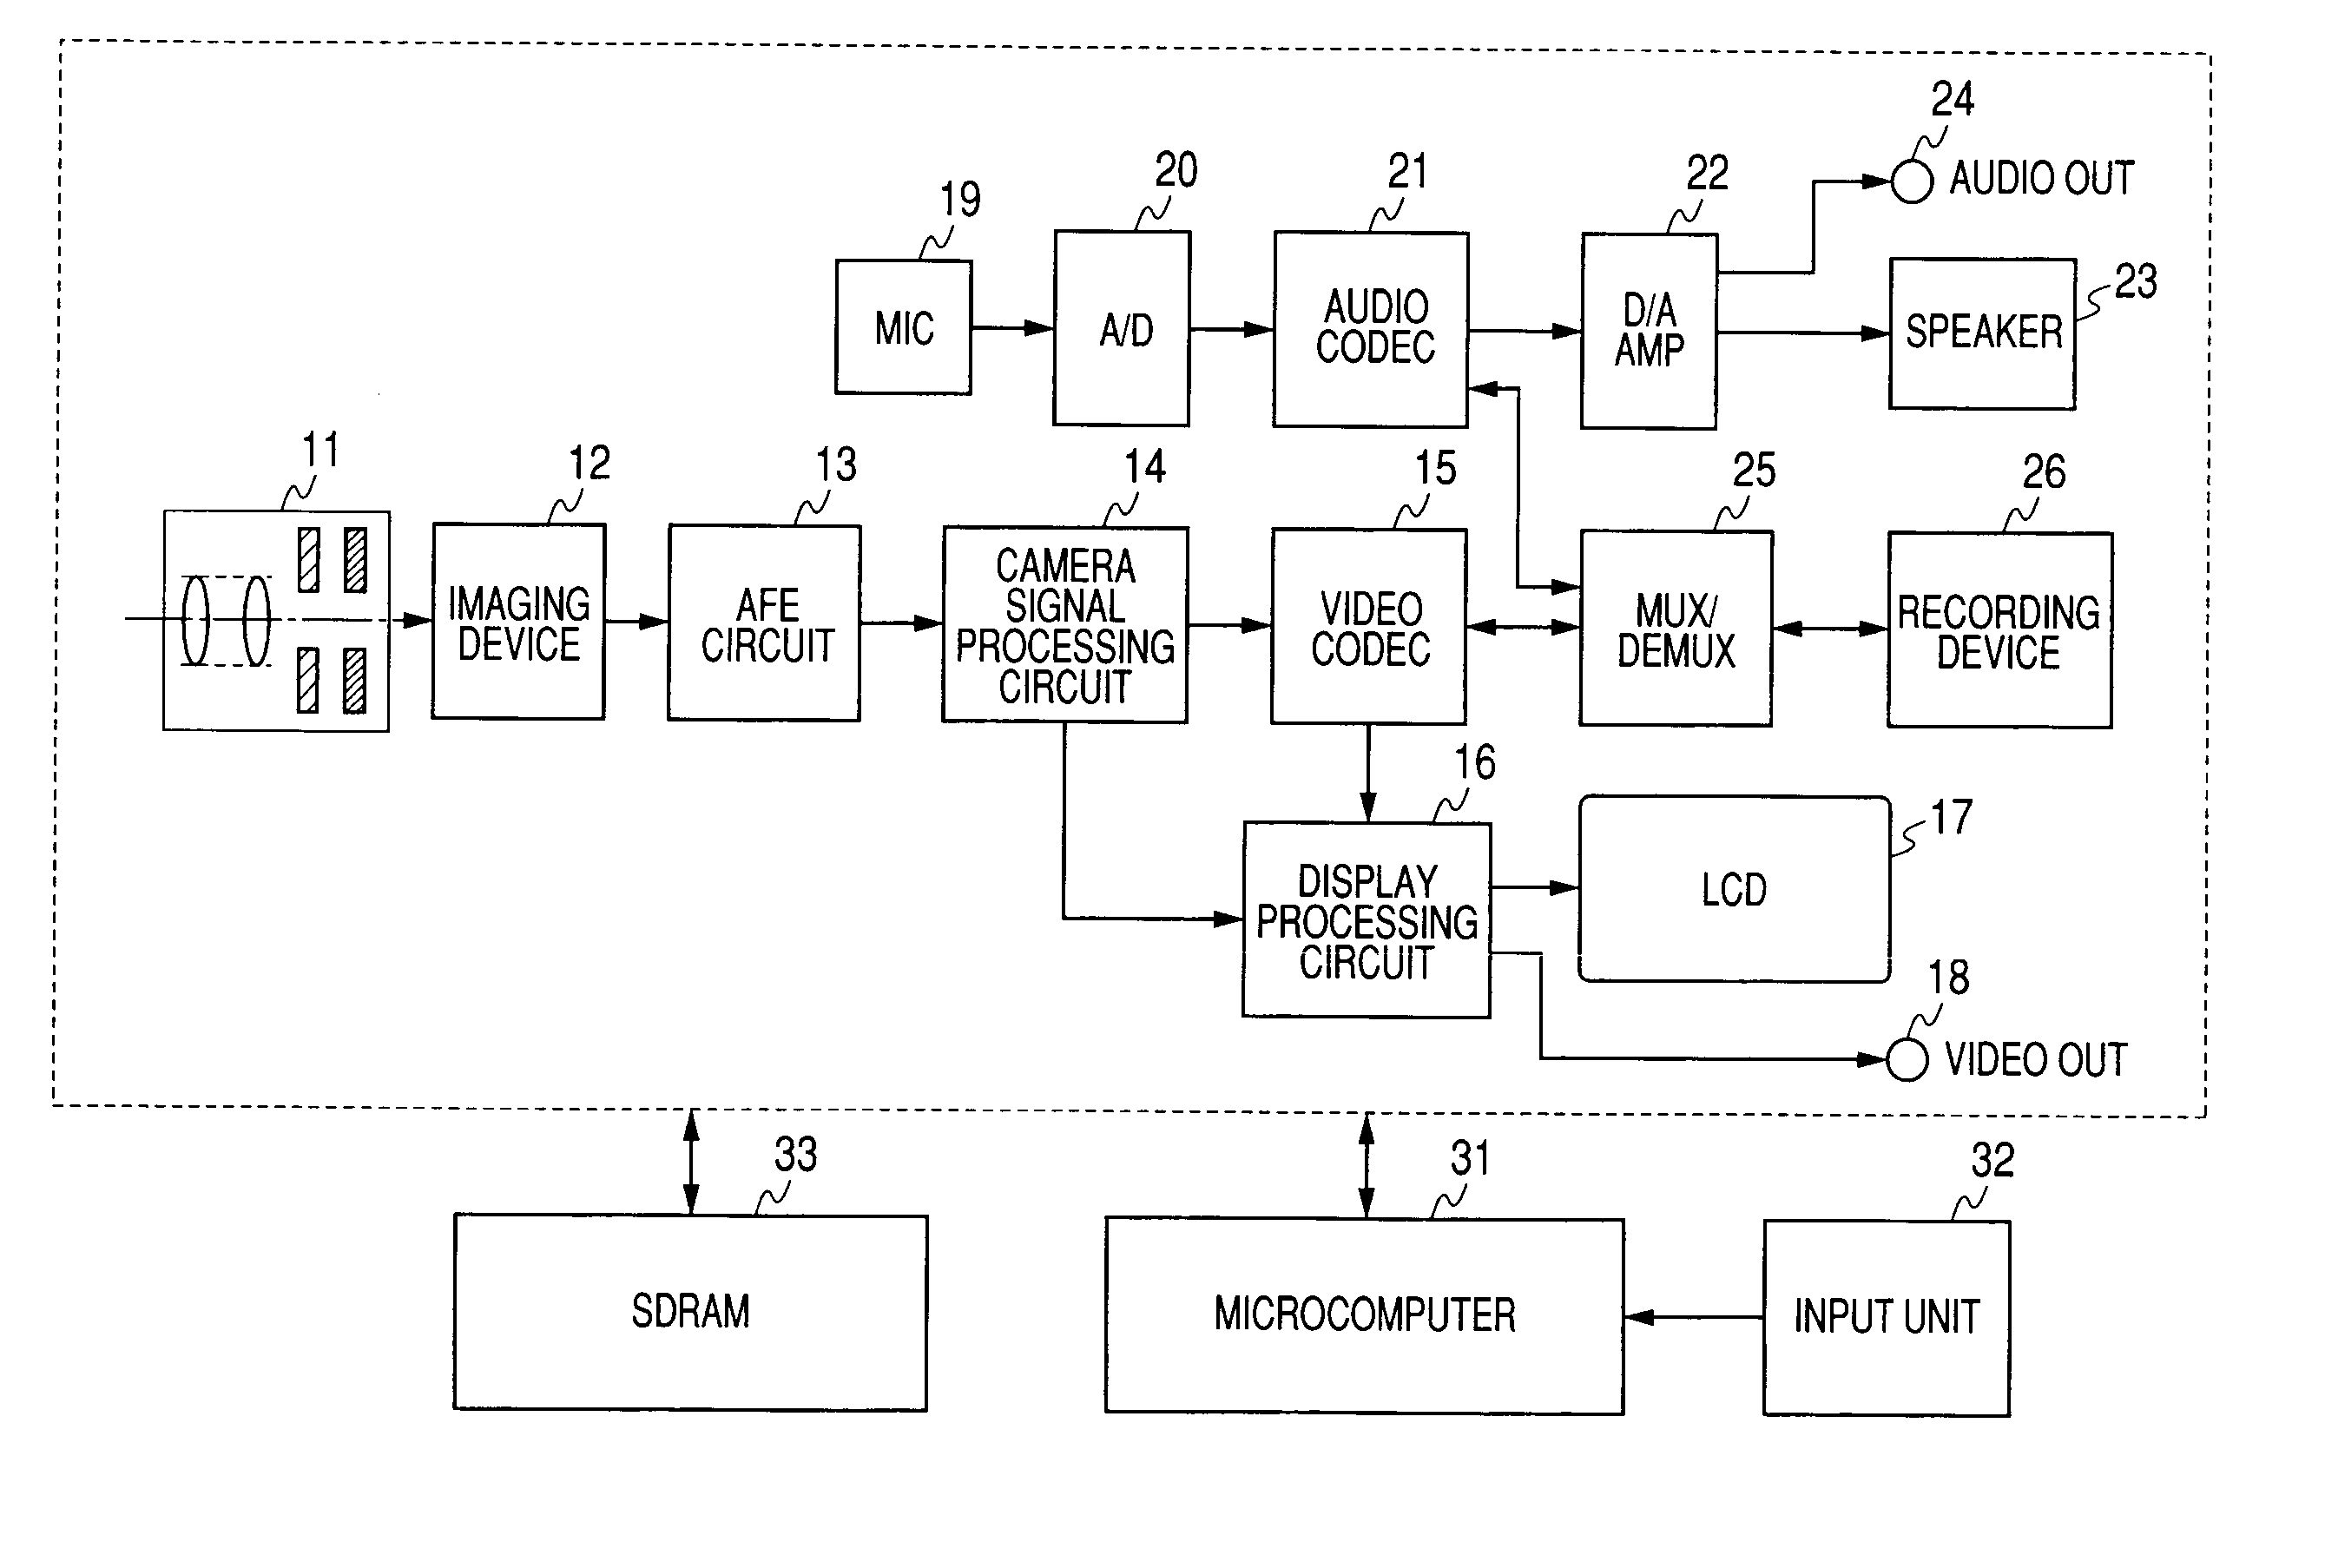 Picture processing apparatus, imaging apparatus and method of the same